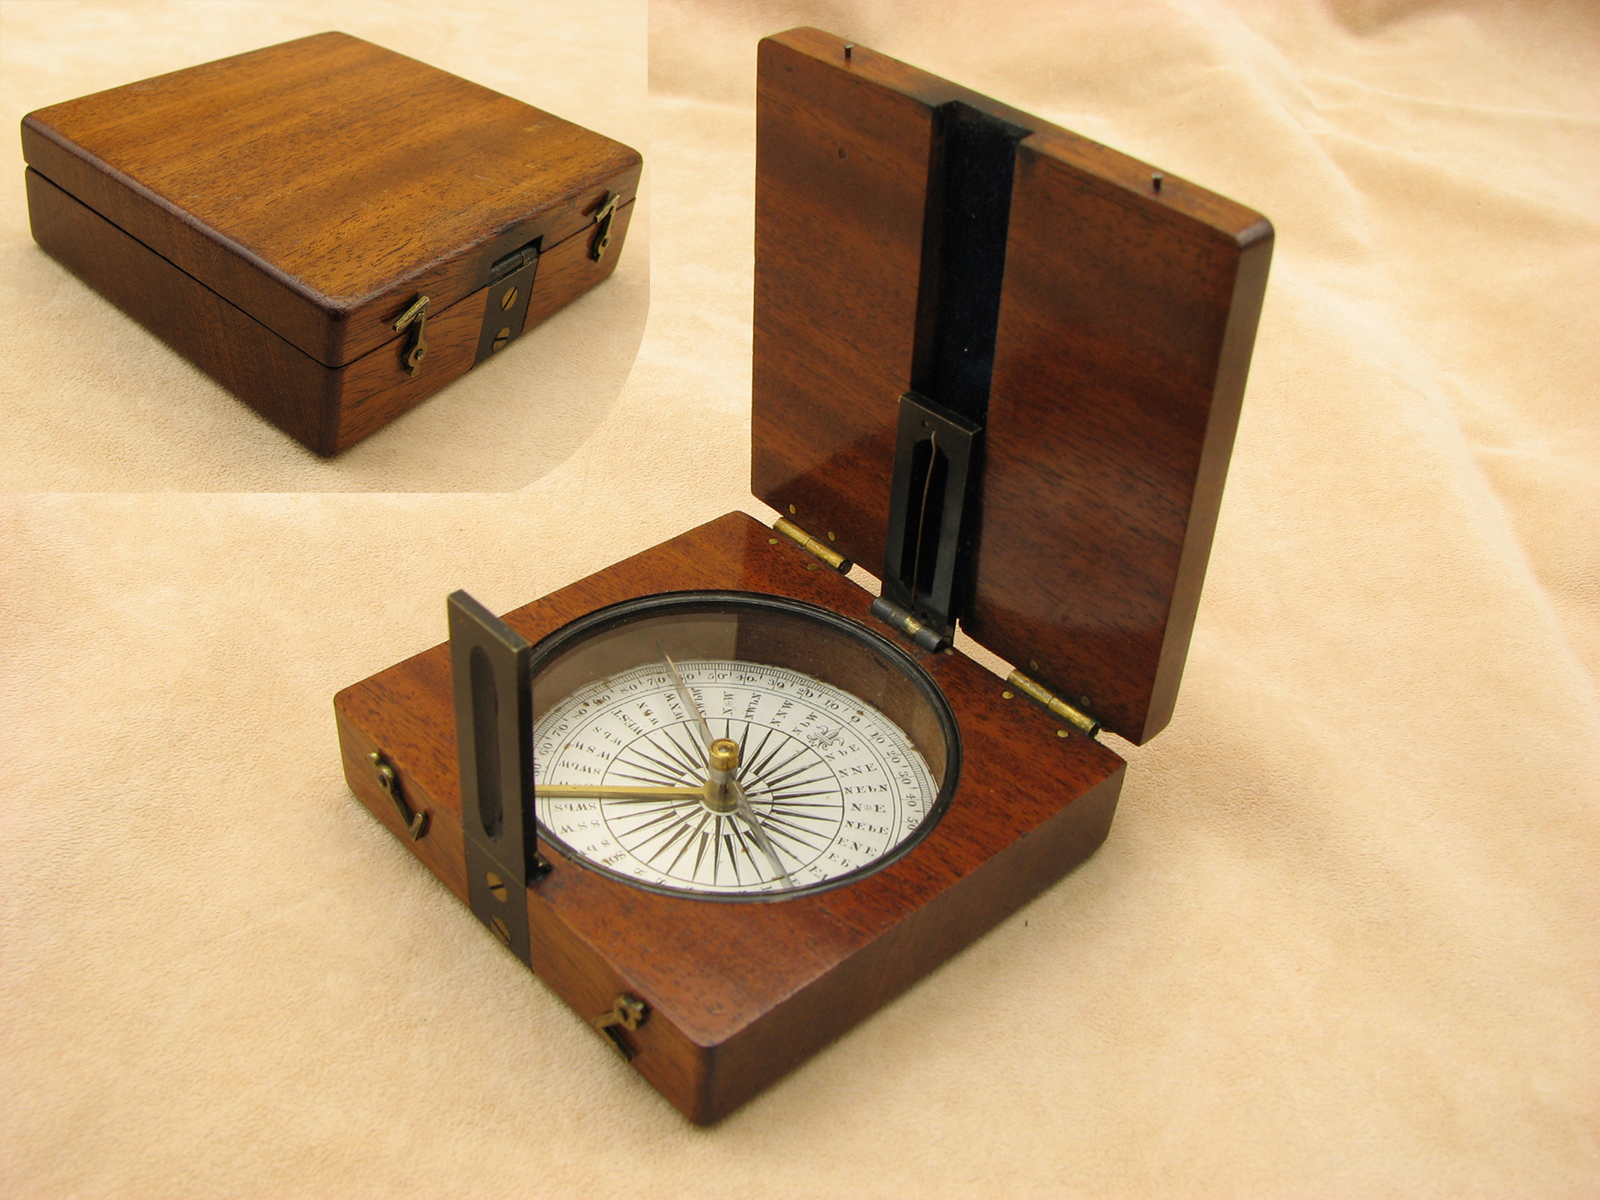 Antique Francis Barker mahogany cased needle compass with twin sight vanes